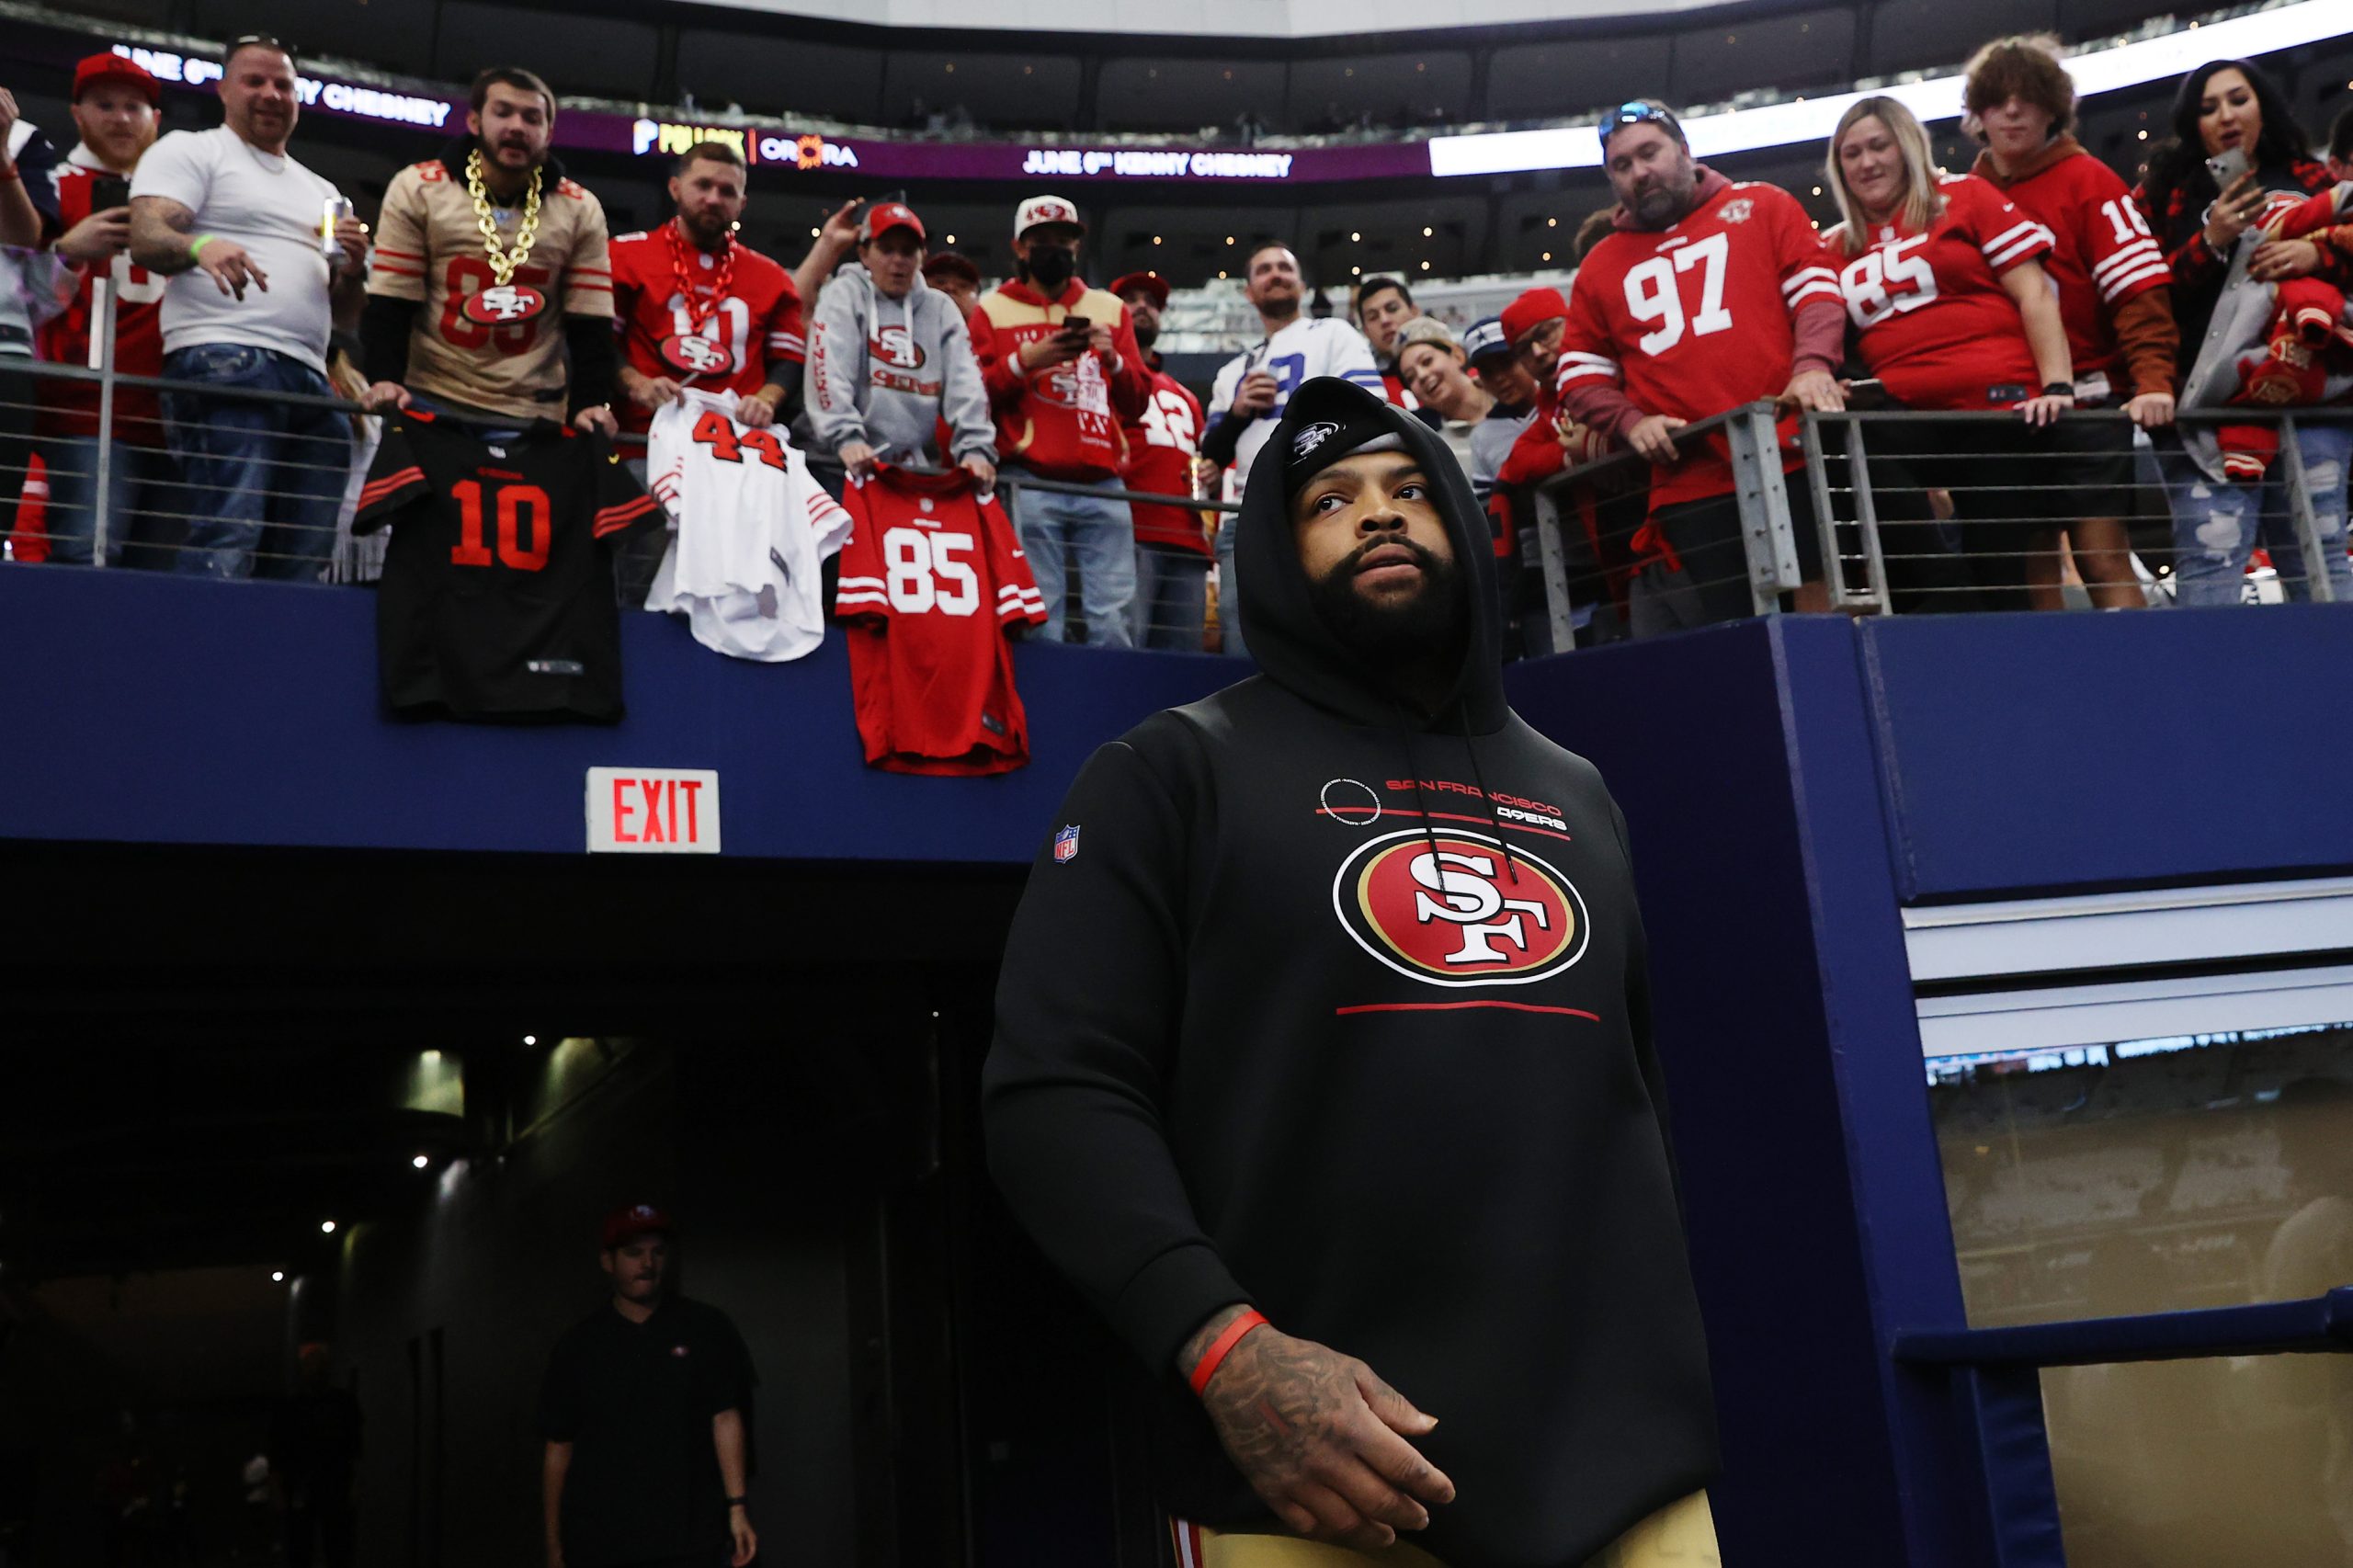 49ers injury updates: Trent Williams could play next week against